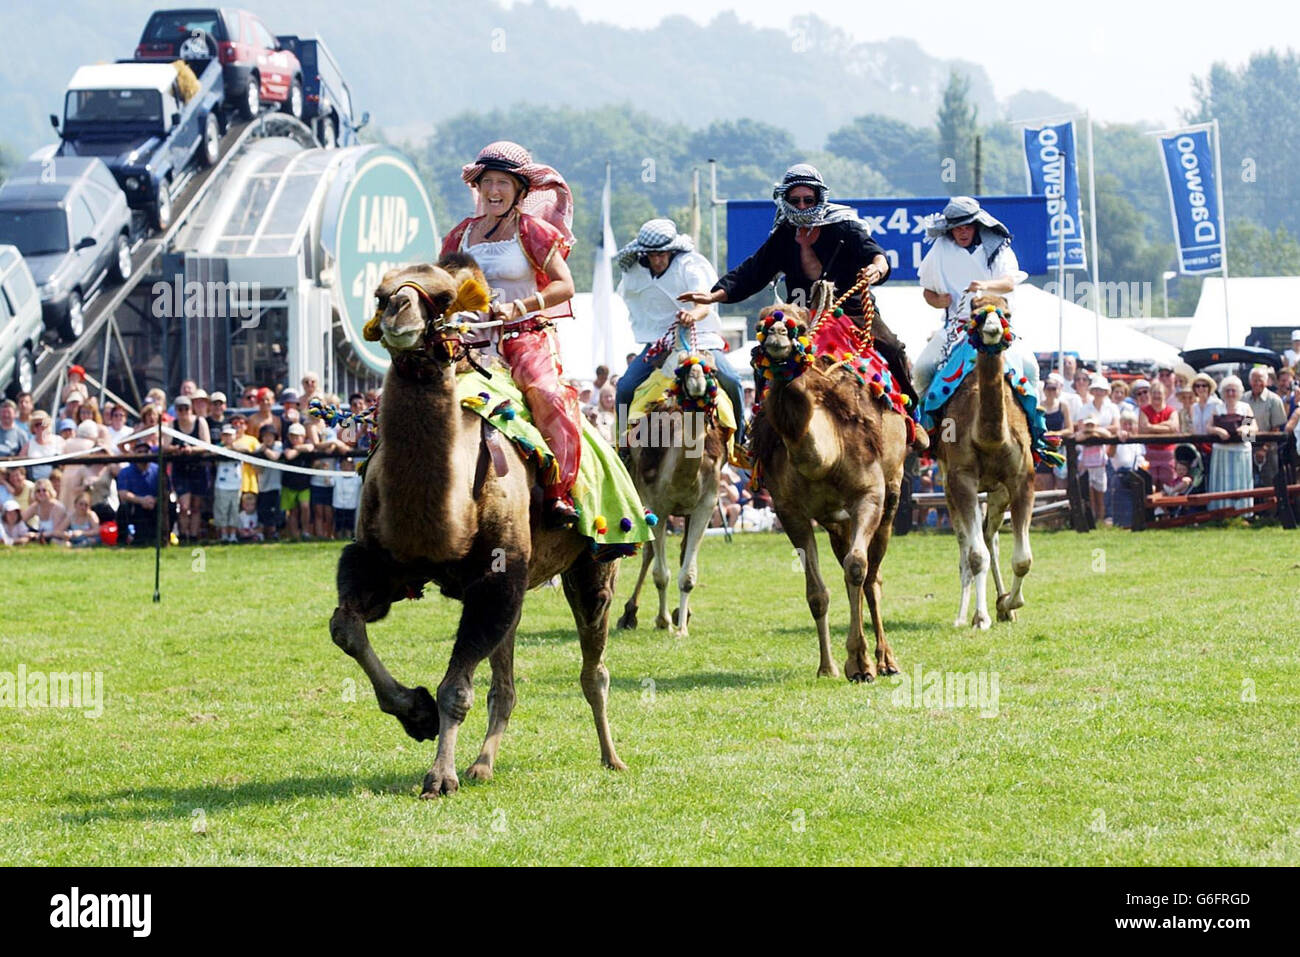 Humphrey ridden by Lady Jane leads the field at the 173rd Annual Bakewell Show. The racing camels top the bill on the first day of the show which will attract an estimated 50,000 people over the following 2 days. Stock Photo